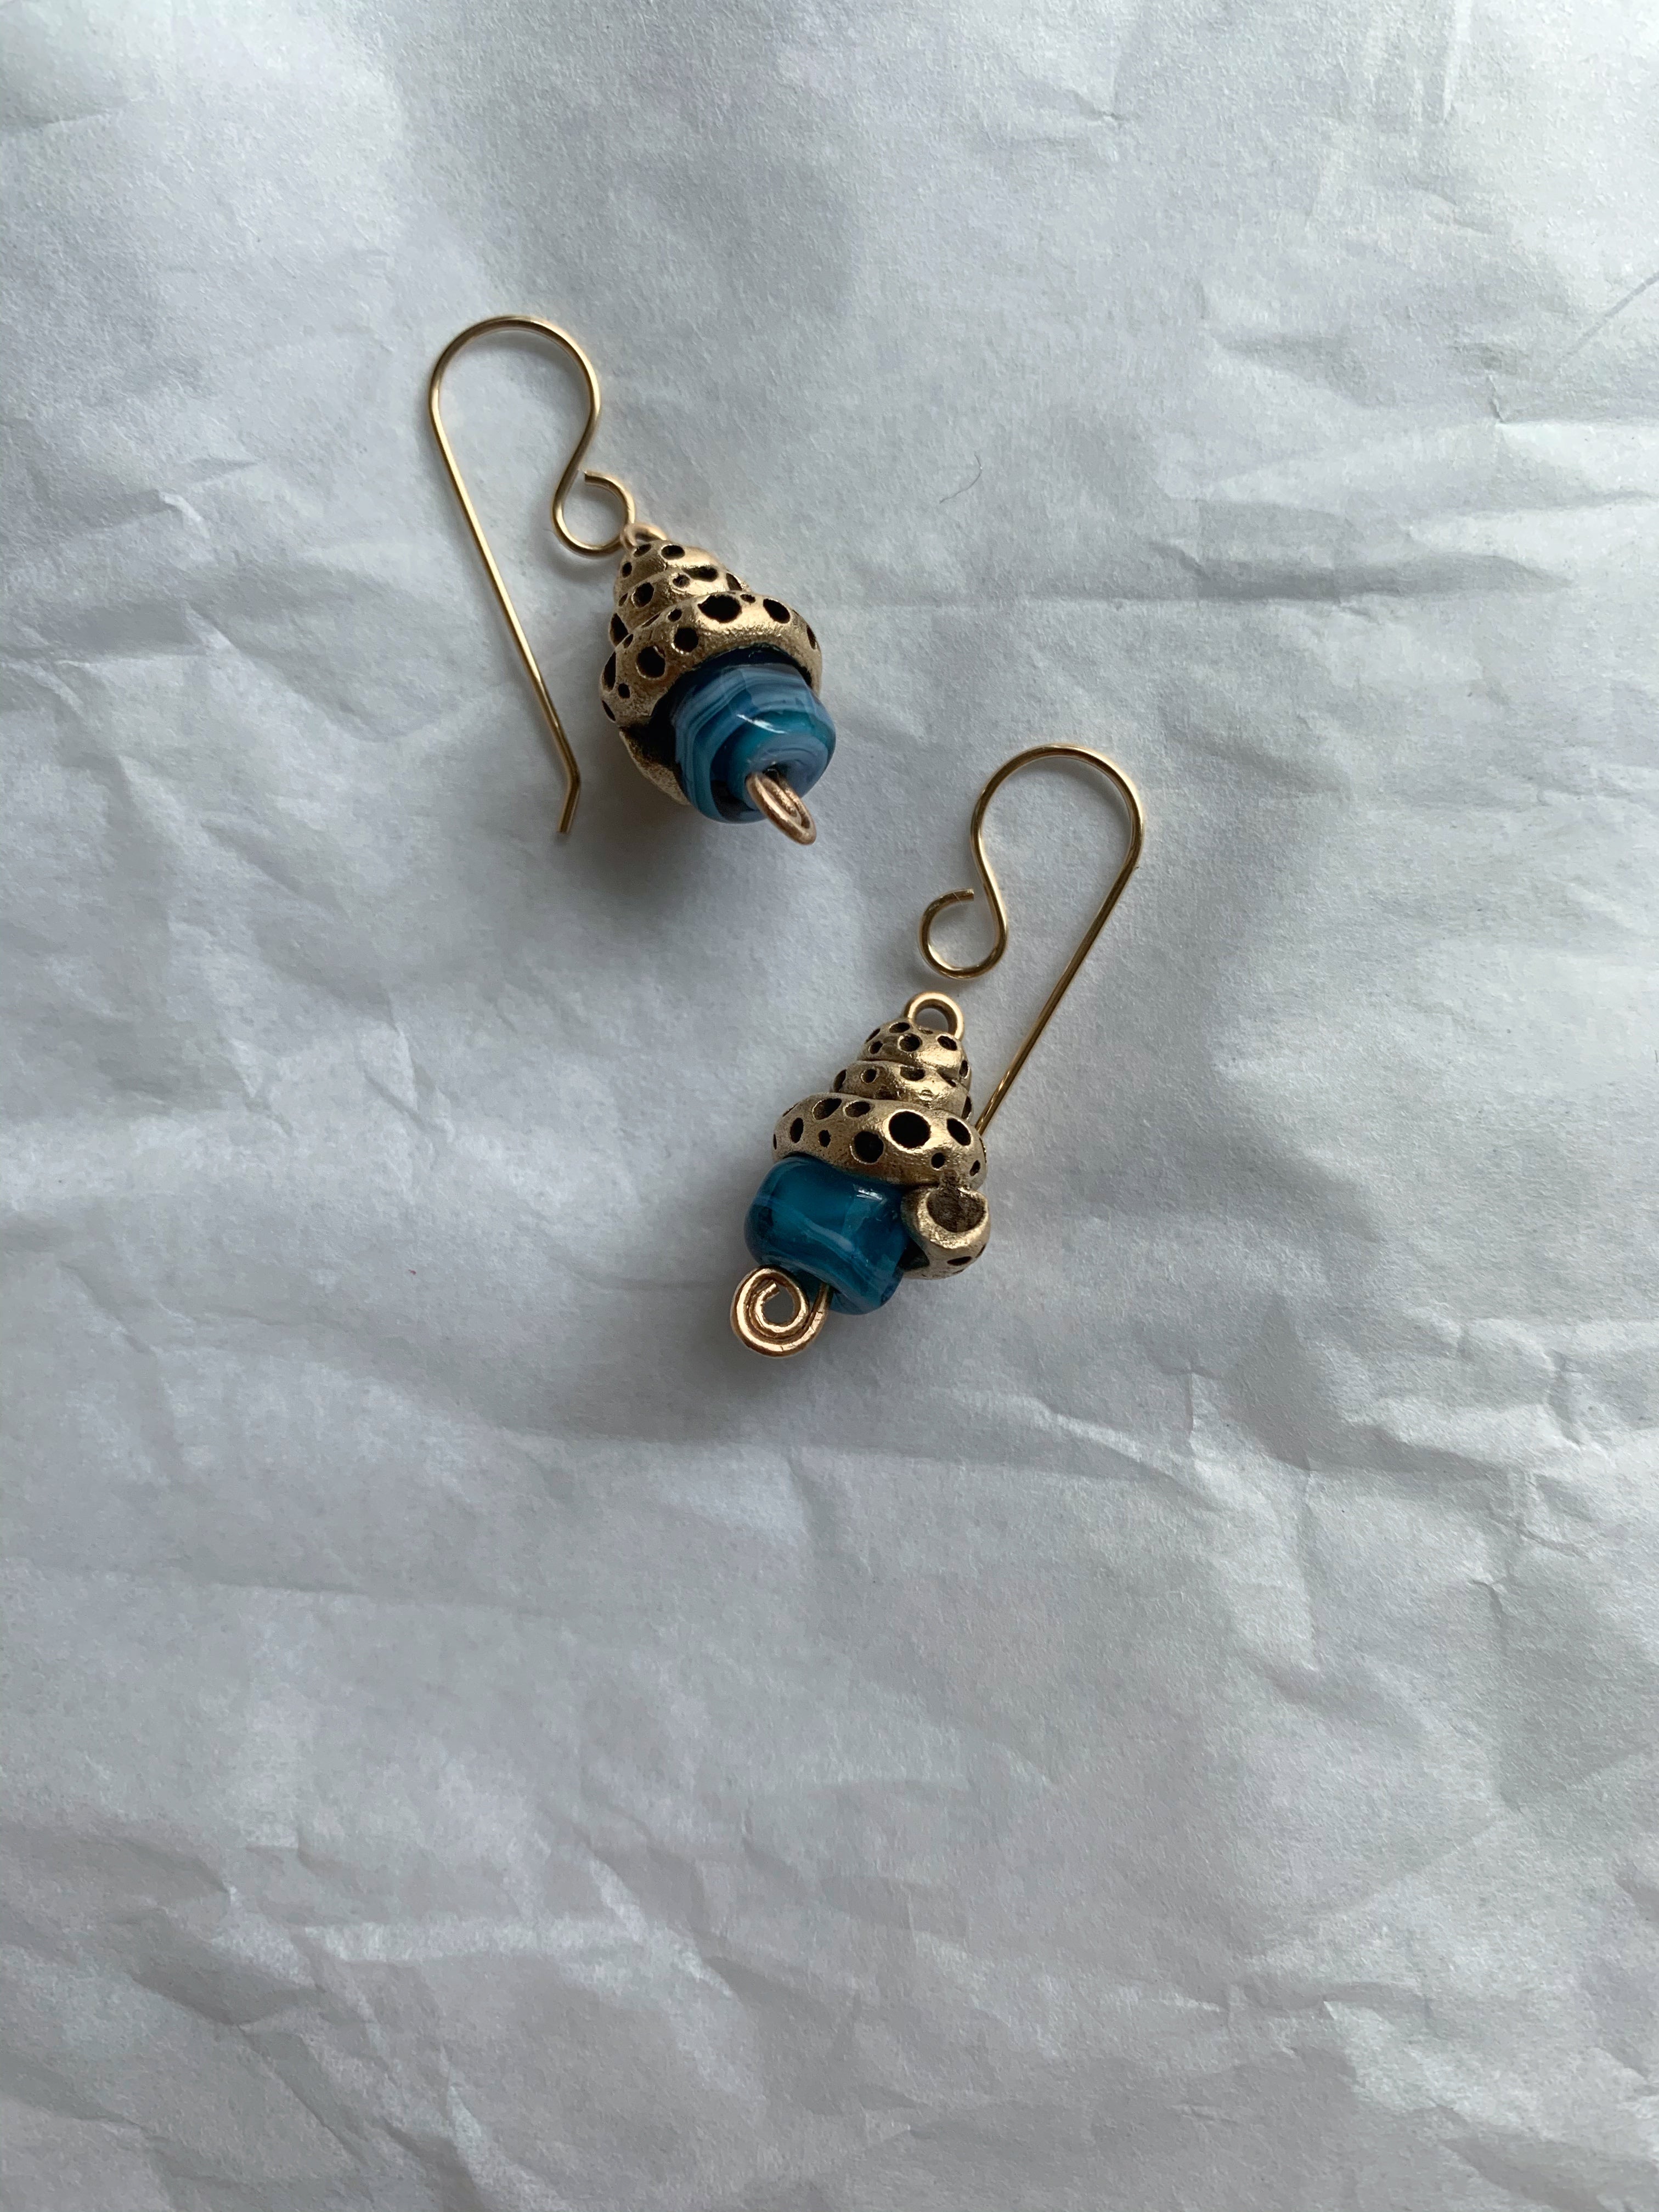 Art jewelry earrings made from bronze and blue glass